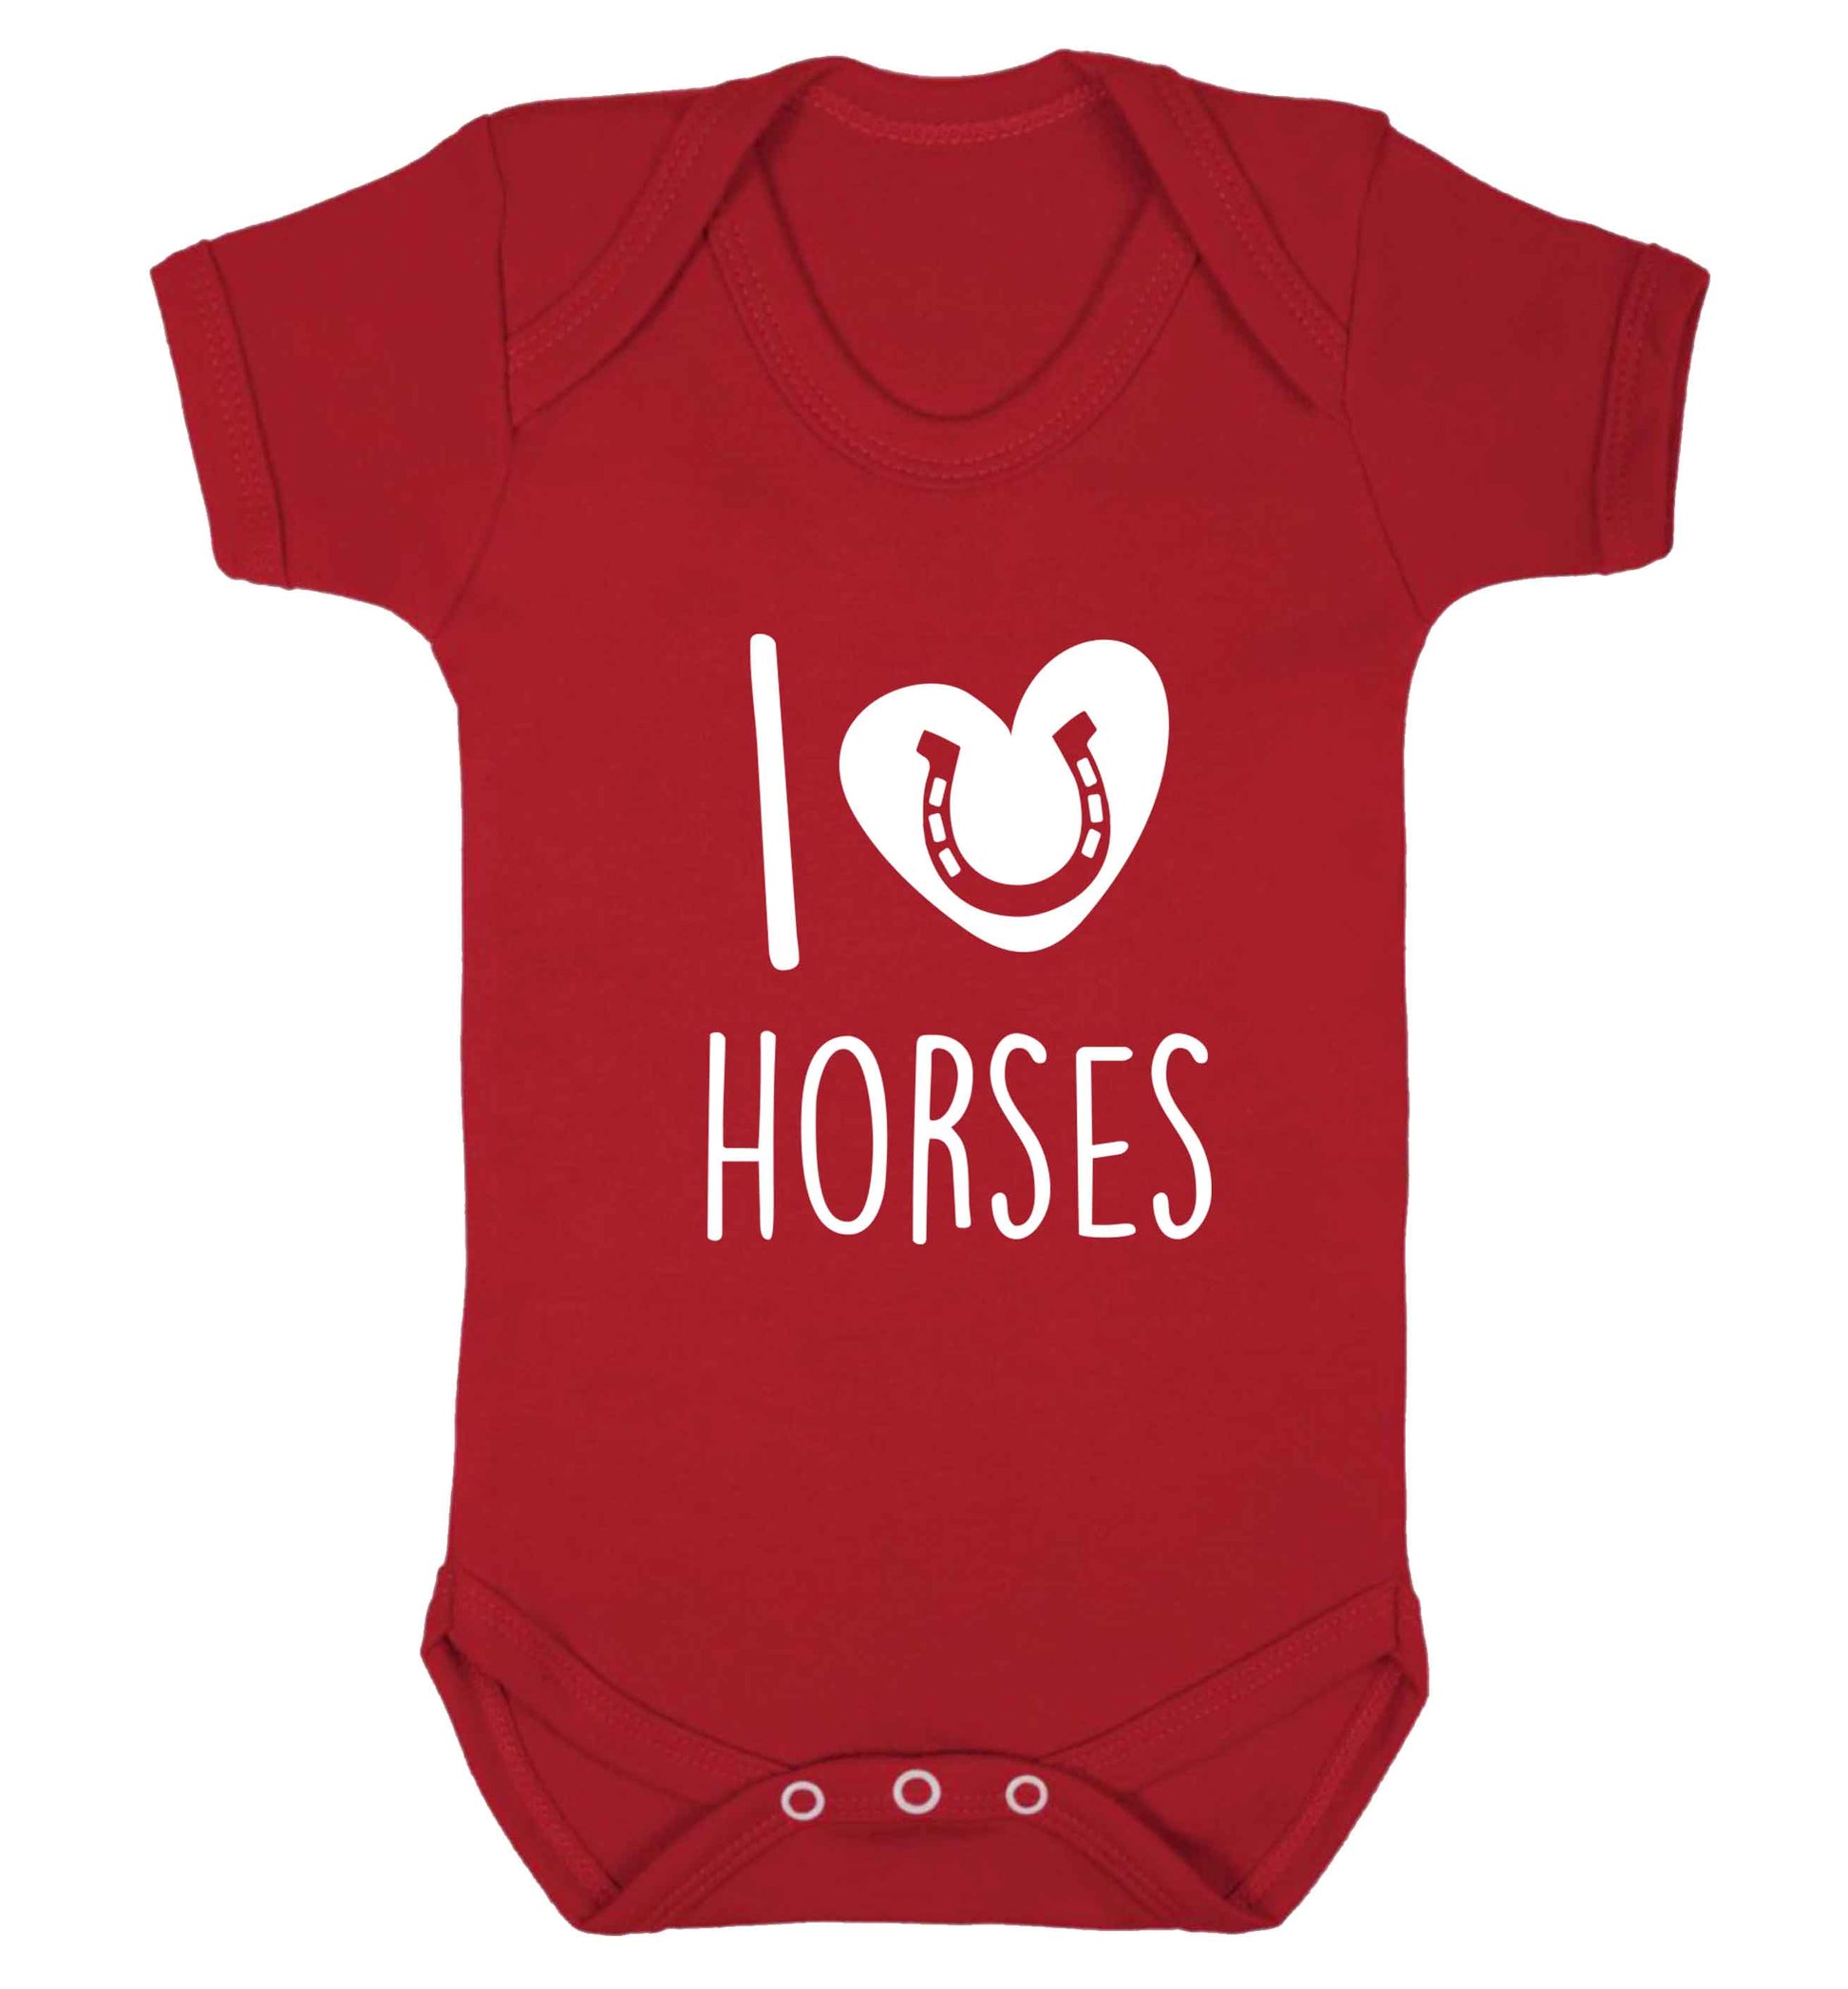 I love horses baby vest red 18-24 months